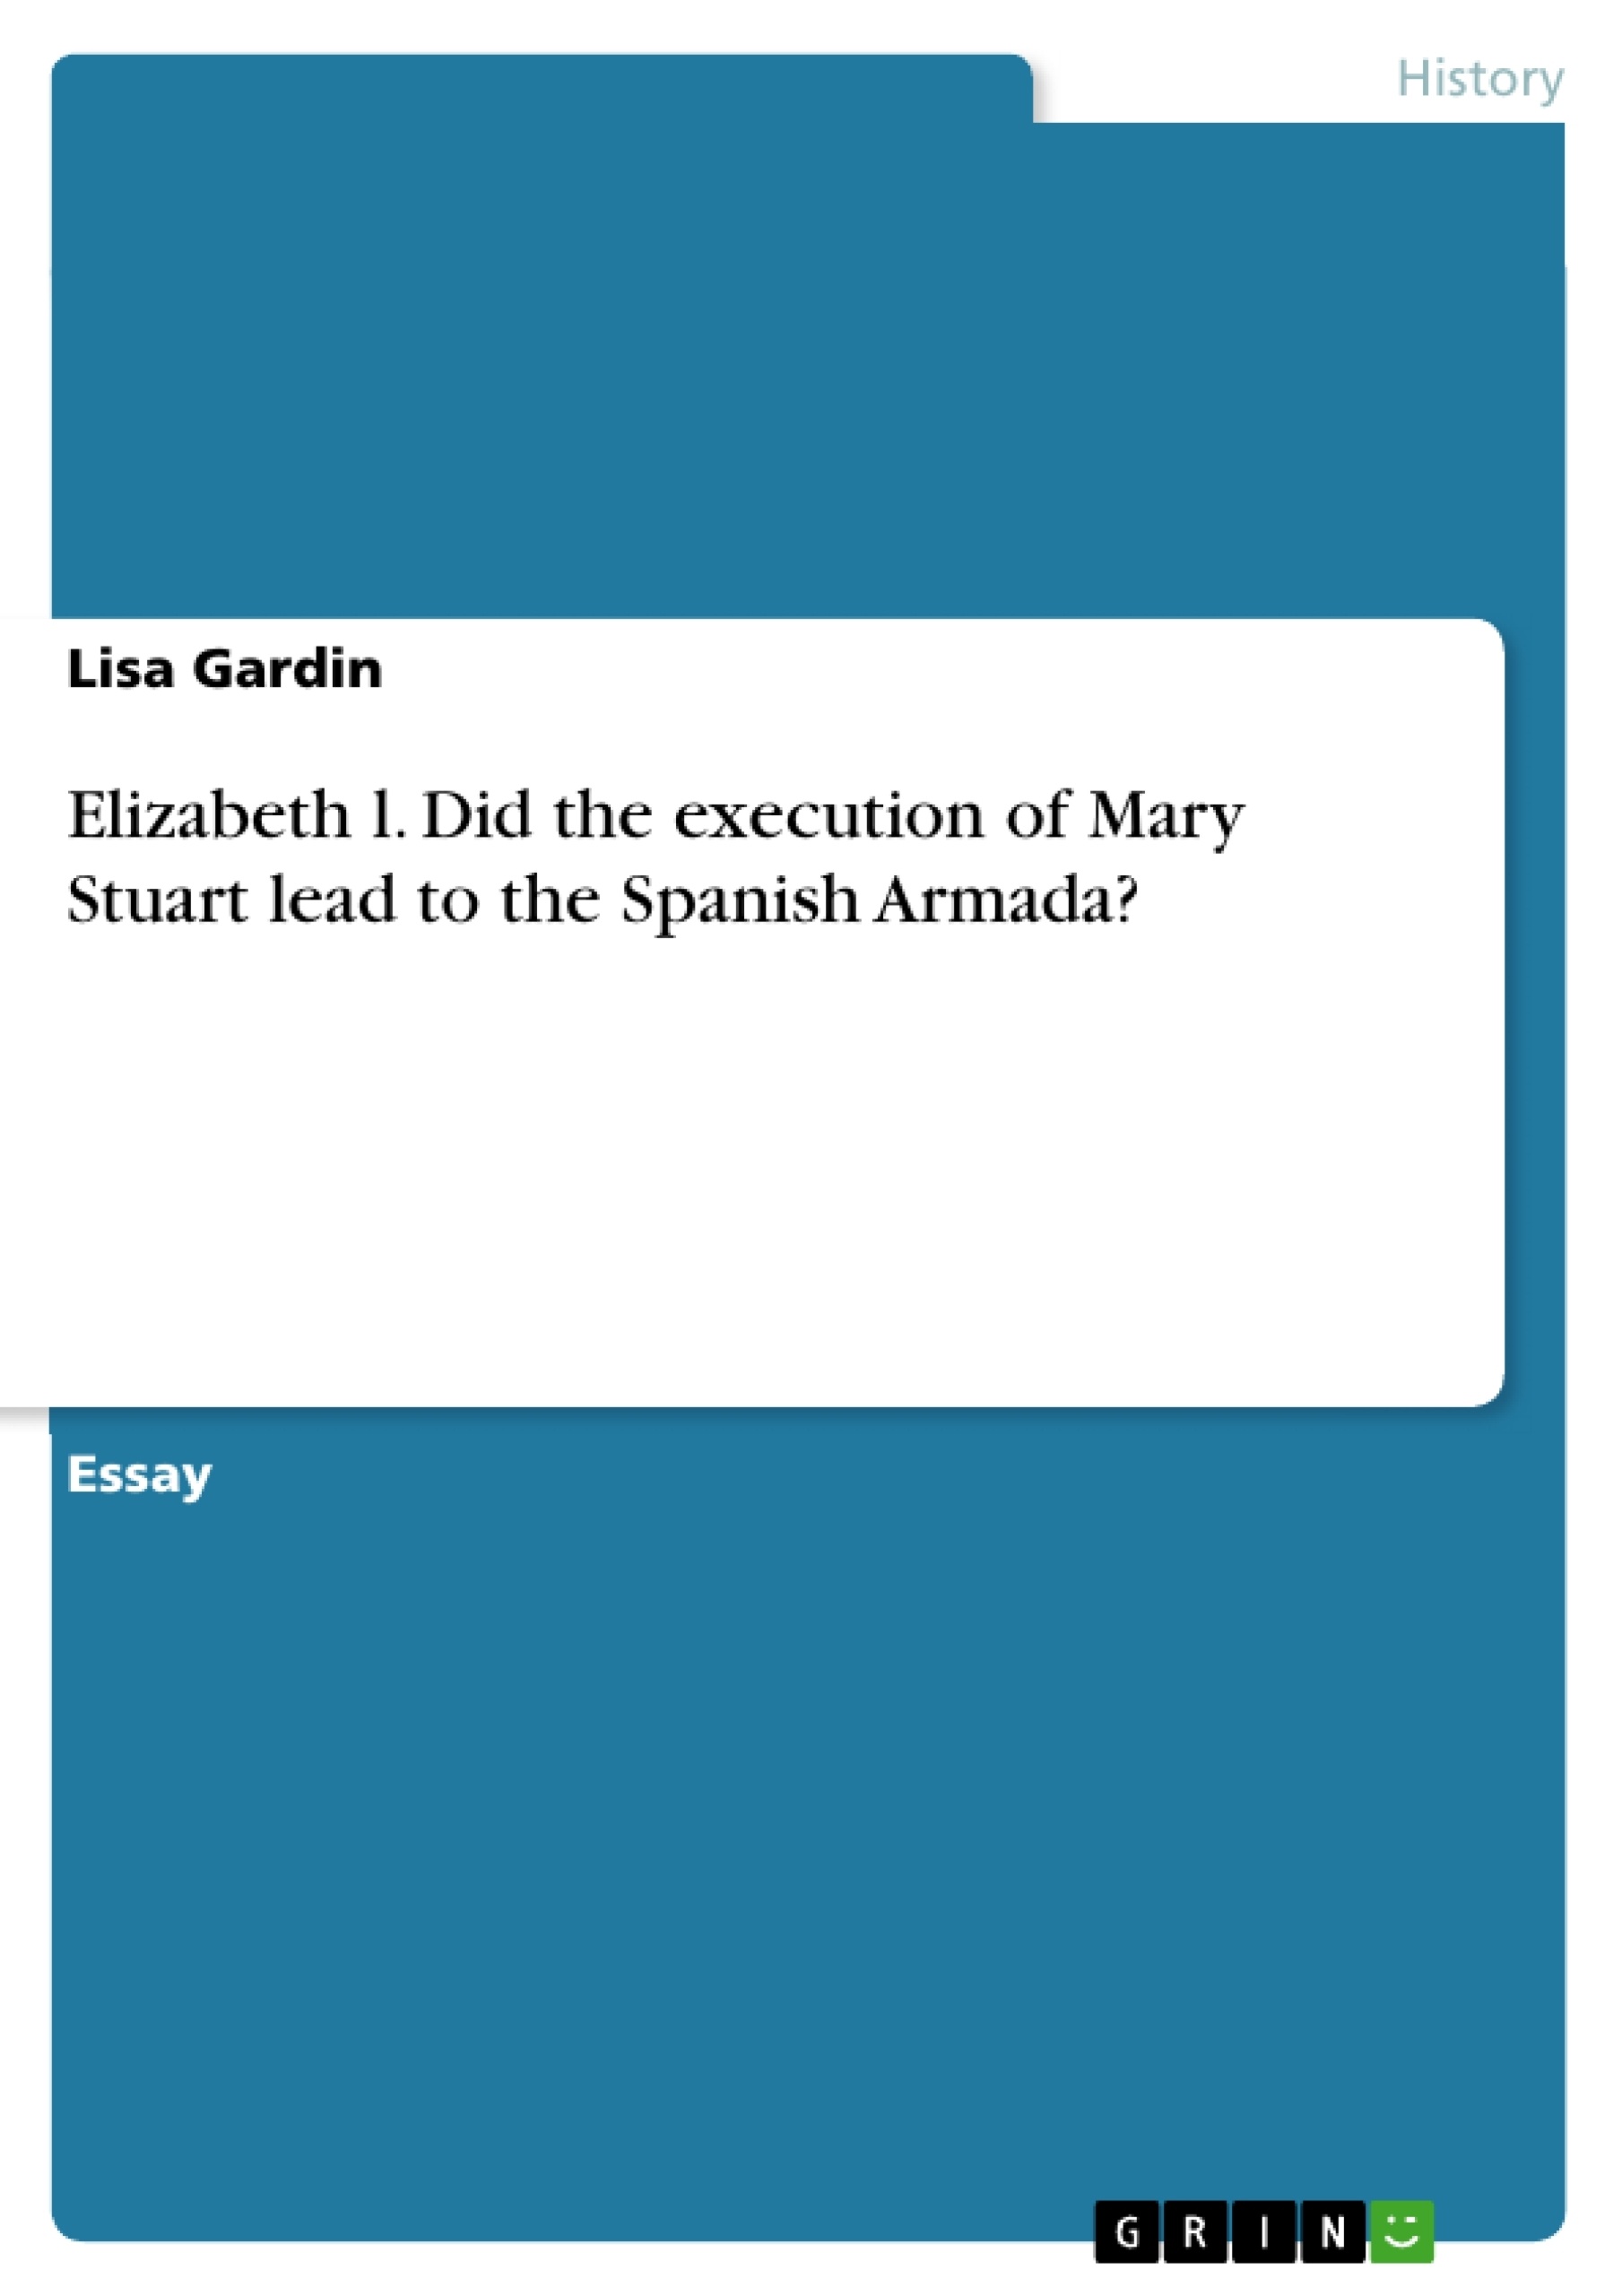 Título: Elizabeth l. Did the execution of Mary Stuart lead to the Spanish Armada?